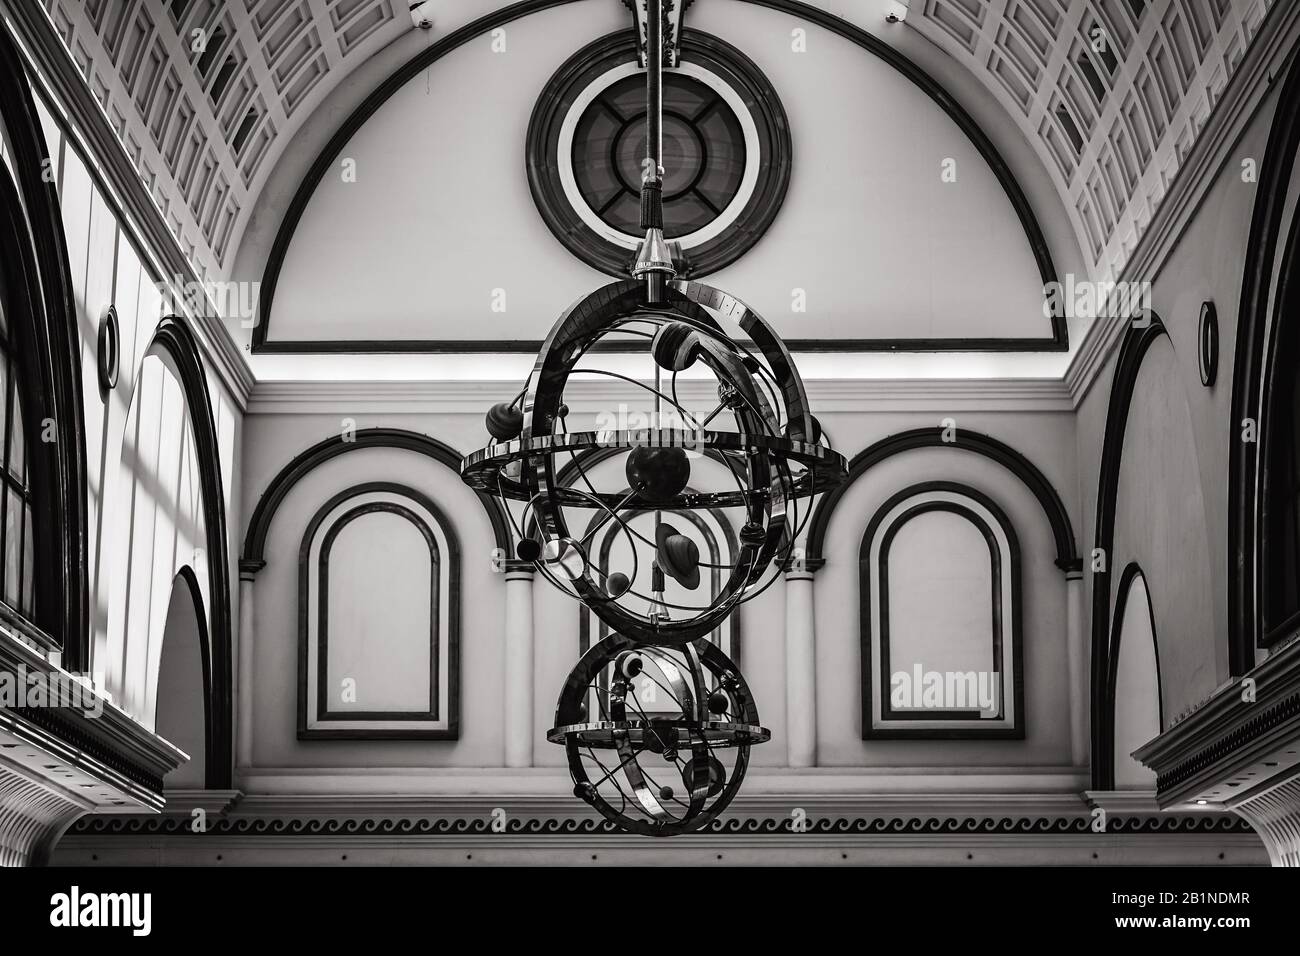 Structure of a solar system hanging from the ceiling of a neoclassical style building Stock Photo